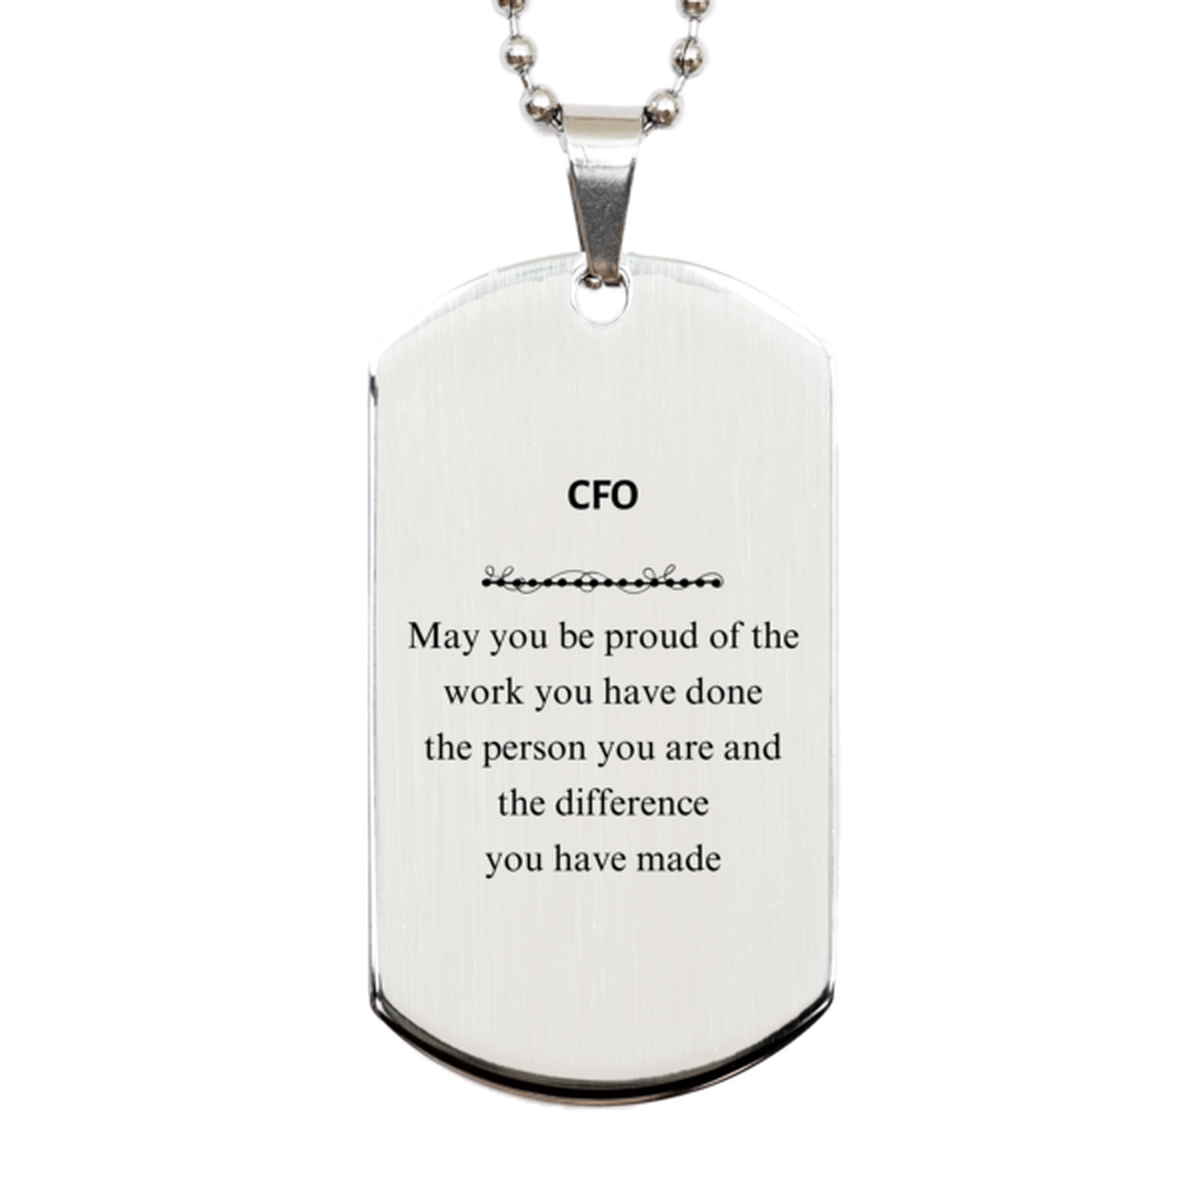 CFO May you be proud of the work you have done, Retirement CFO Silver Dog Tag for Colleague Appreciation Gifts Amazing for CFO